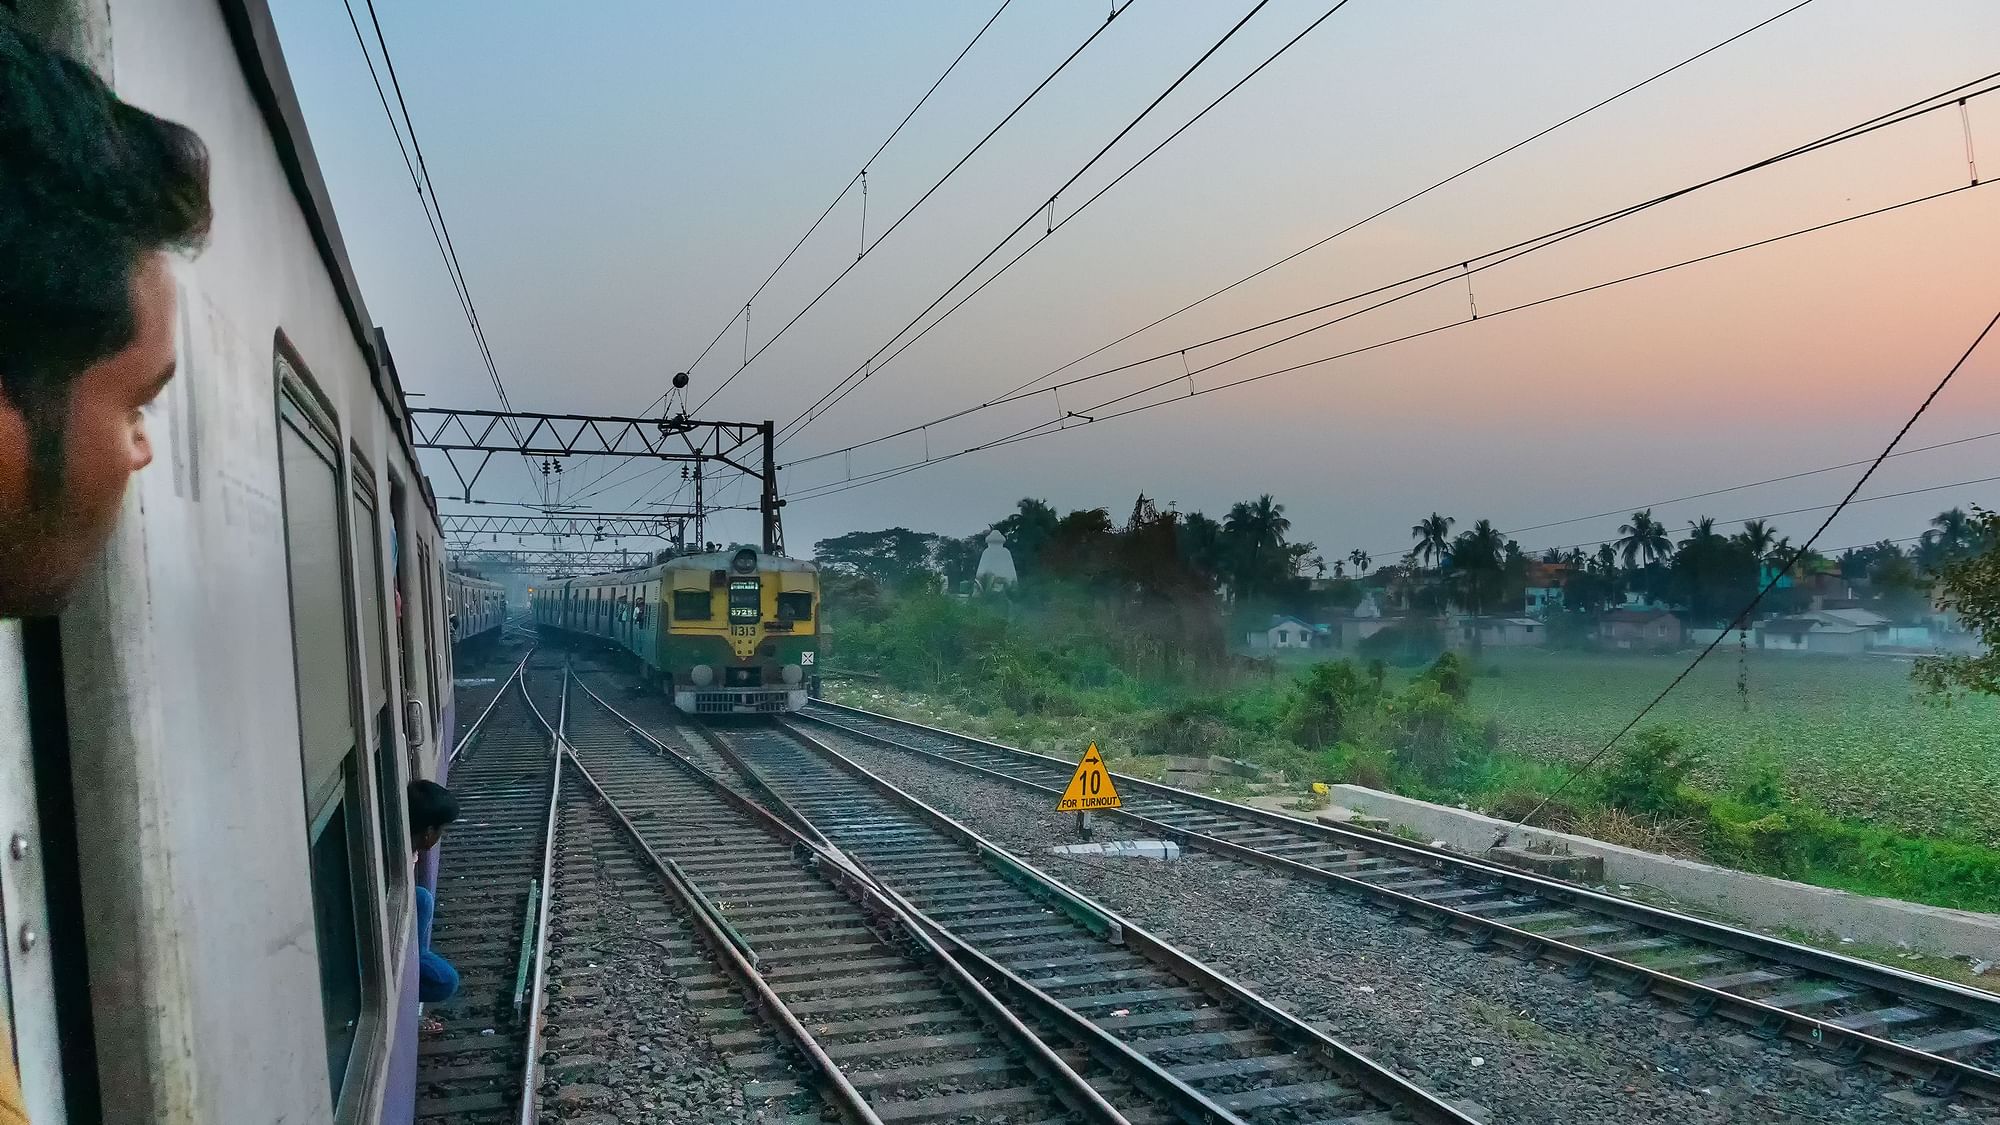 Railways Recruitment 2019: The last date to apply for SECR Trade Apprentices is 25 July 2019.